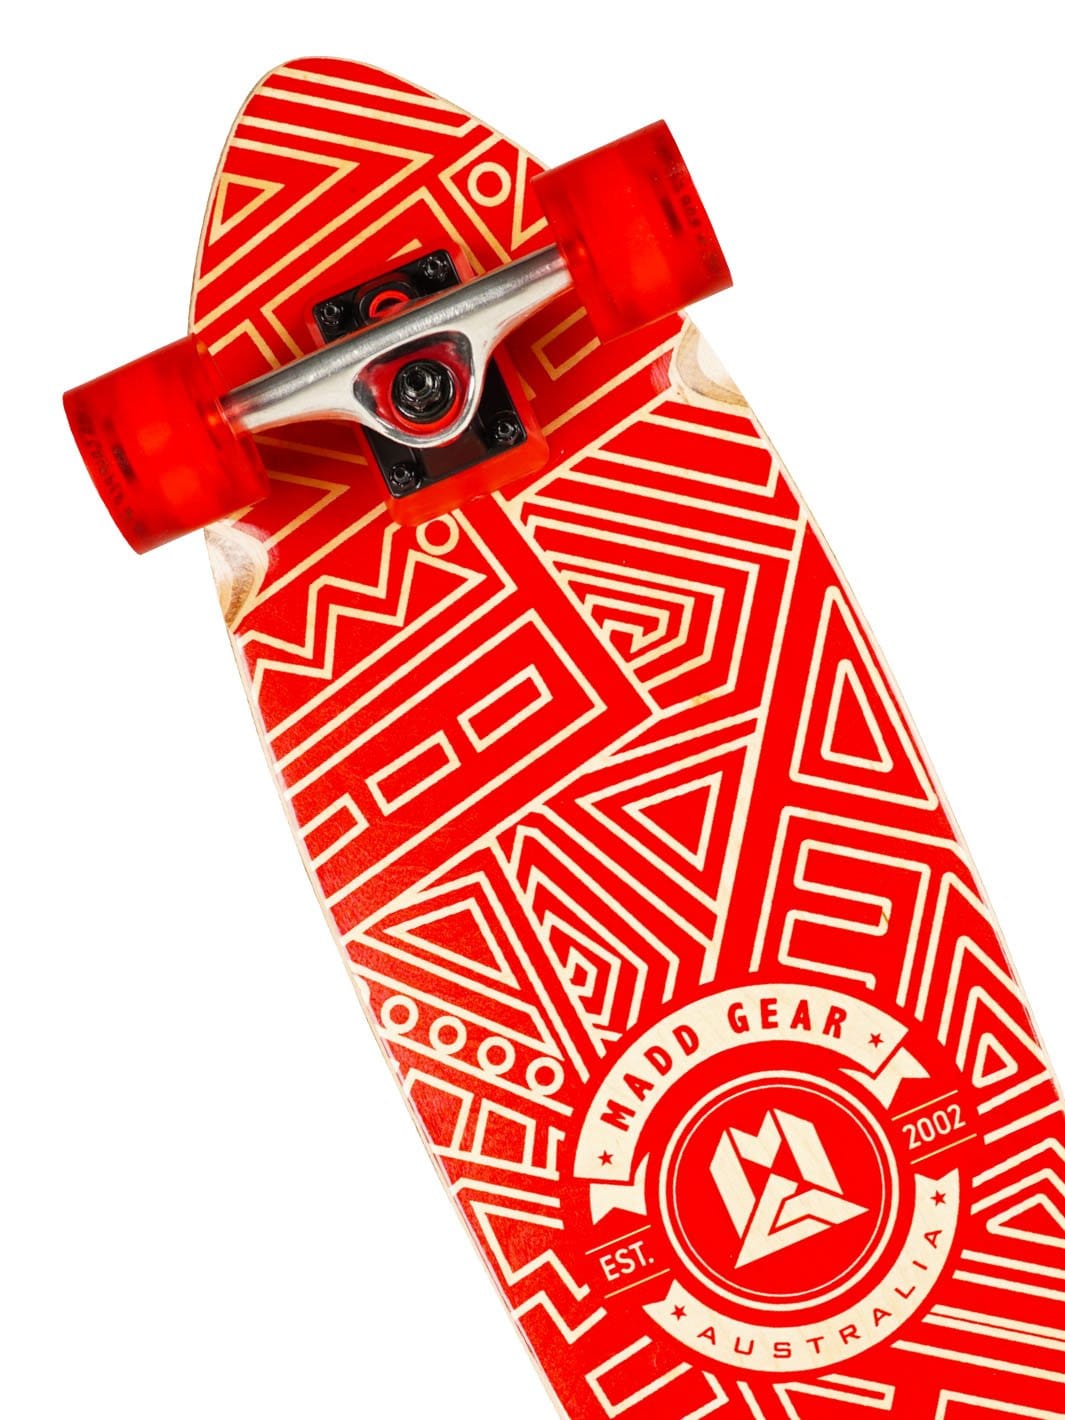 Madd Gear 36" Longboard Complete Skateboard Maple Adults High Quality Aluminum Trucks Red Tribal Large Red Wheels